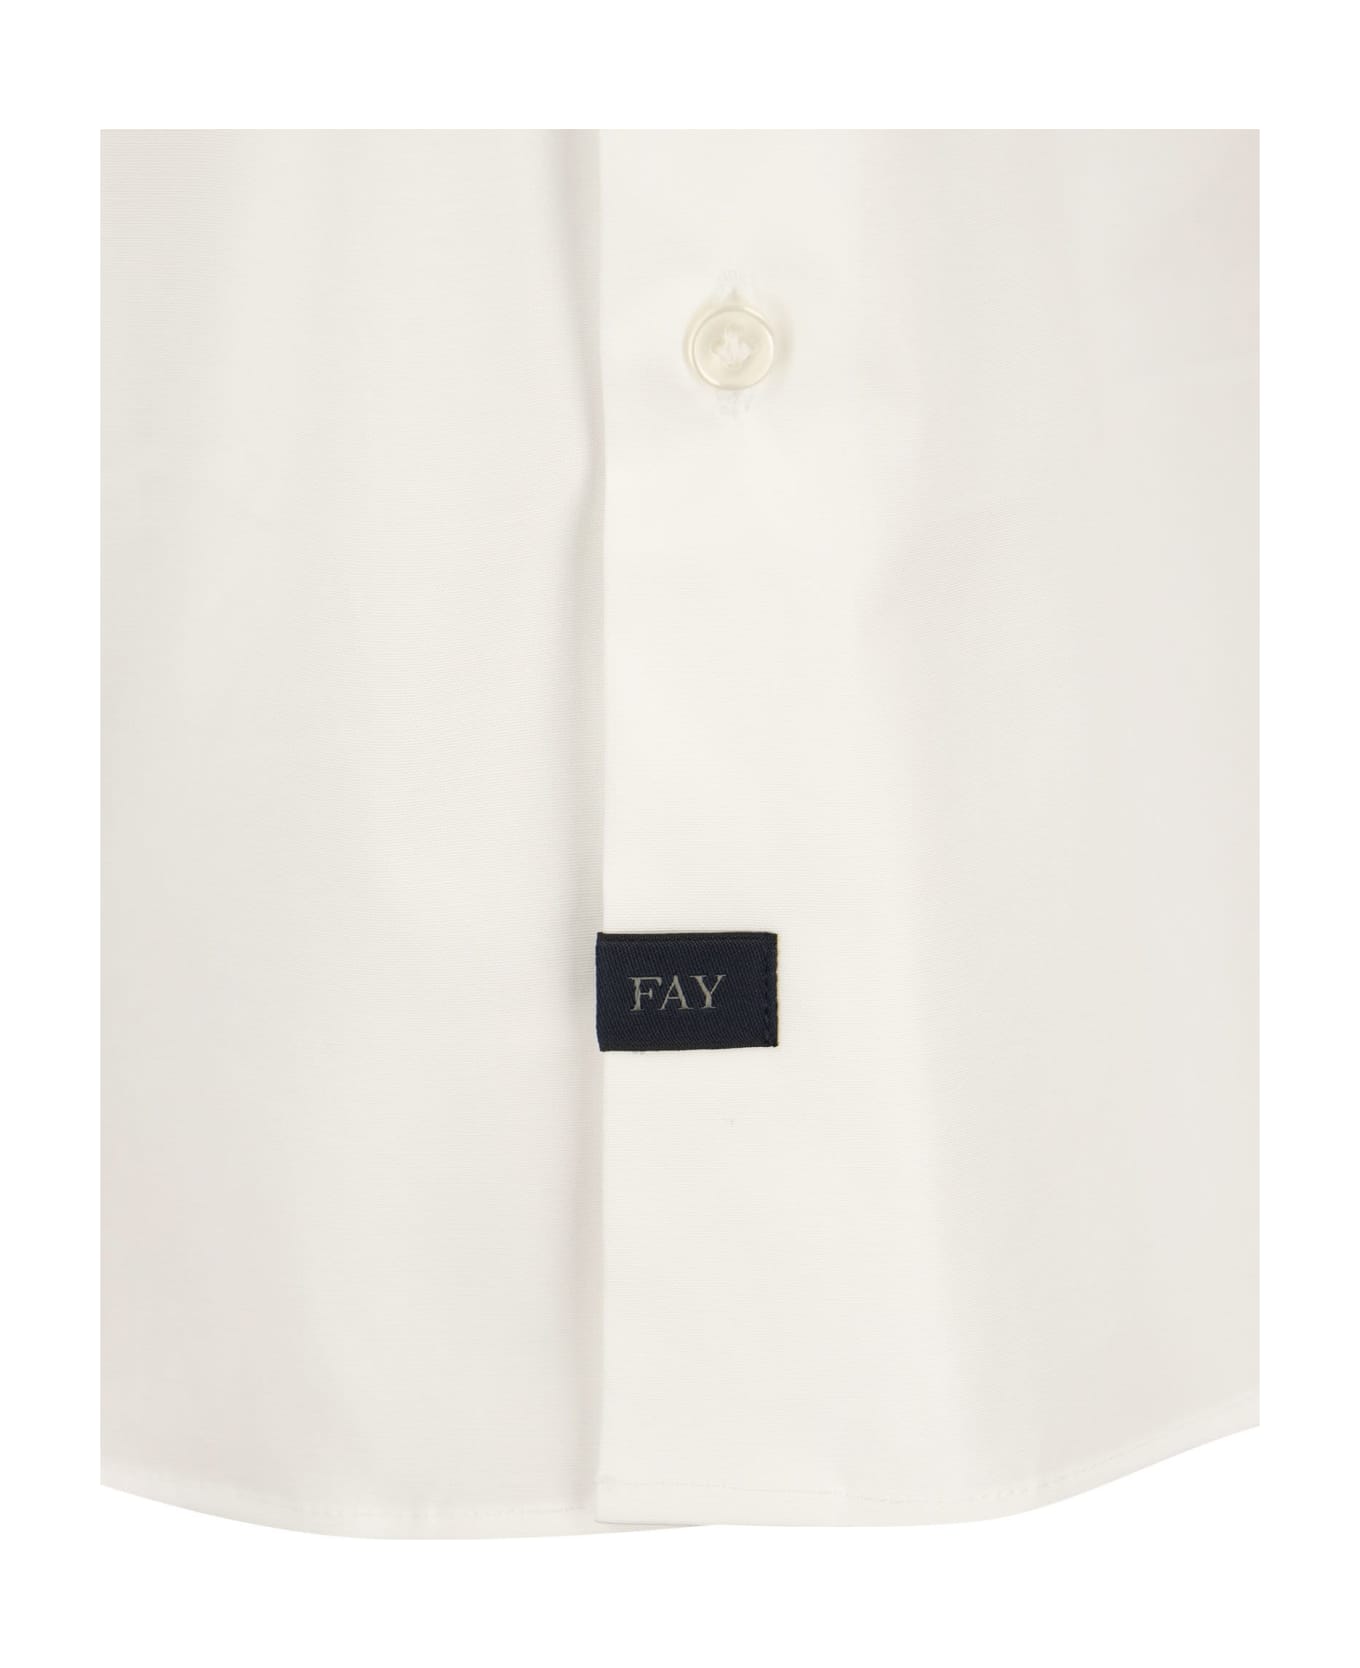 Fay Stretch French Collar Shirt - White